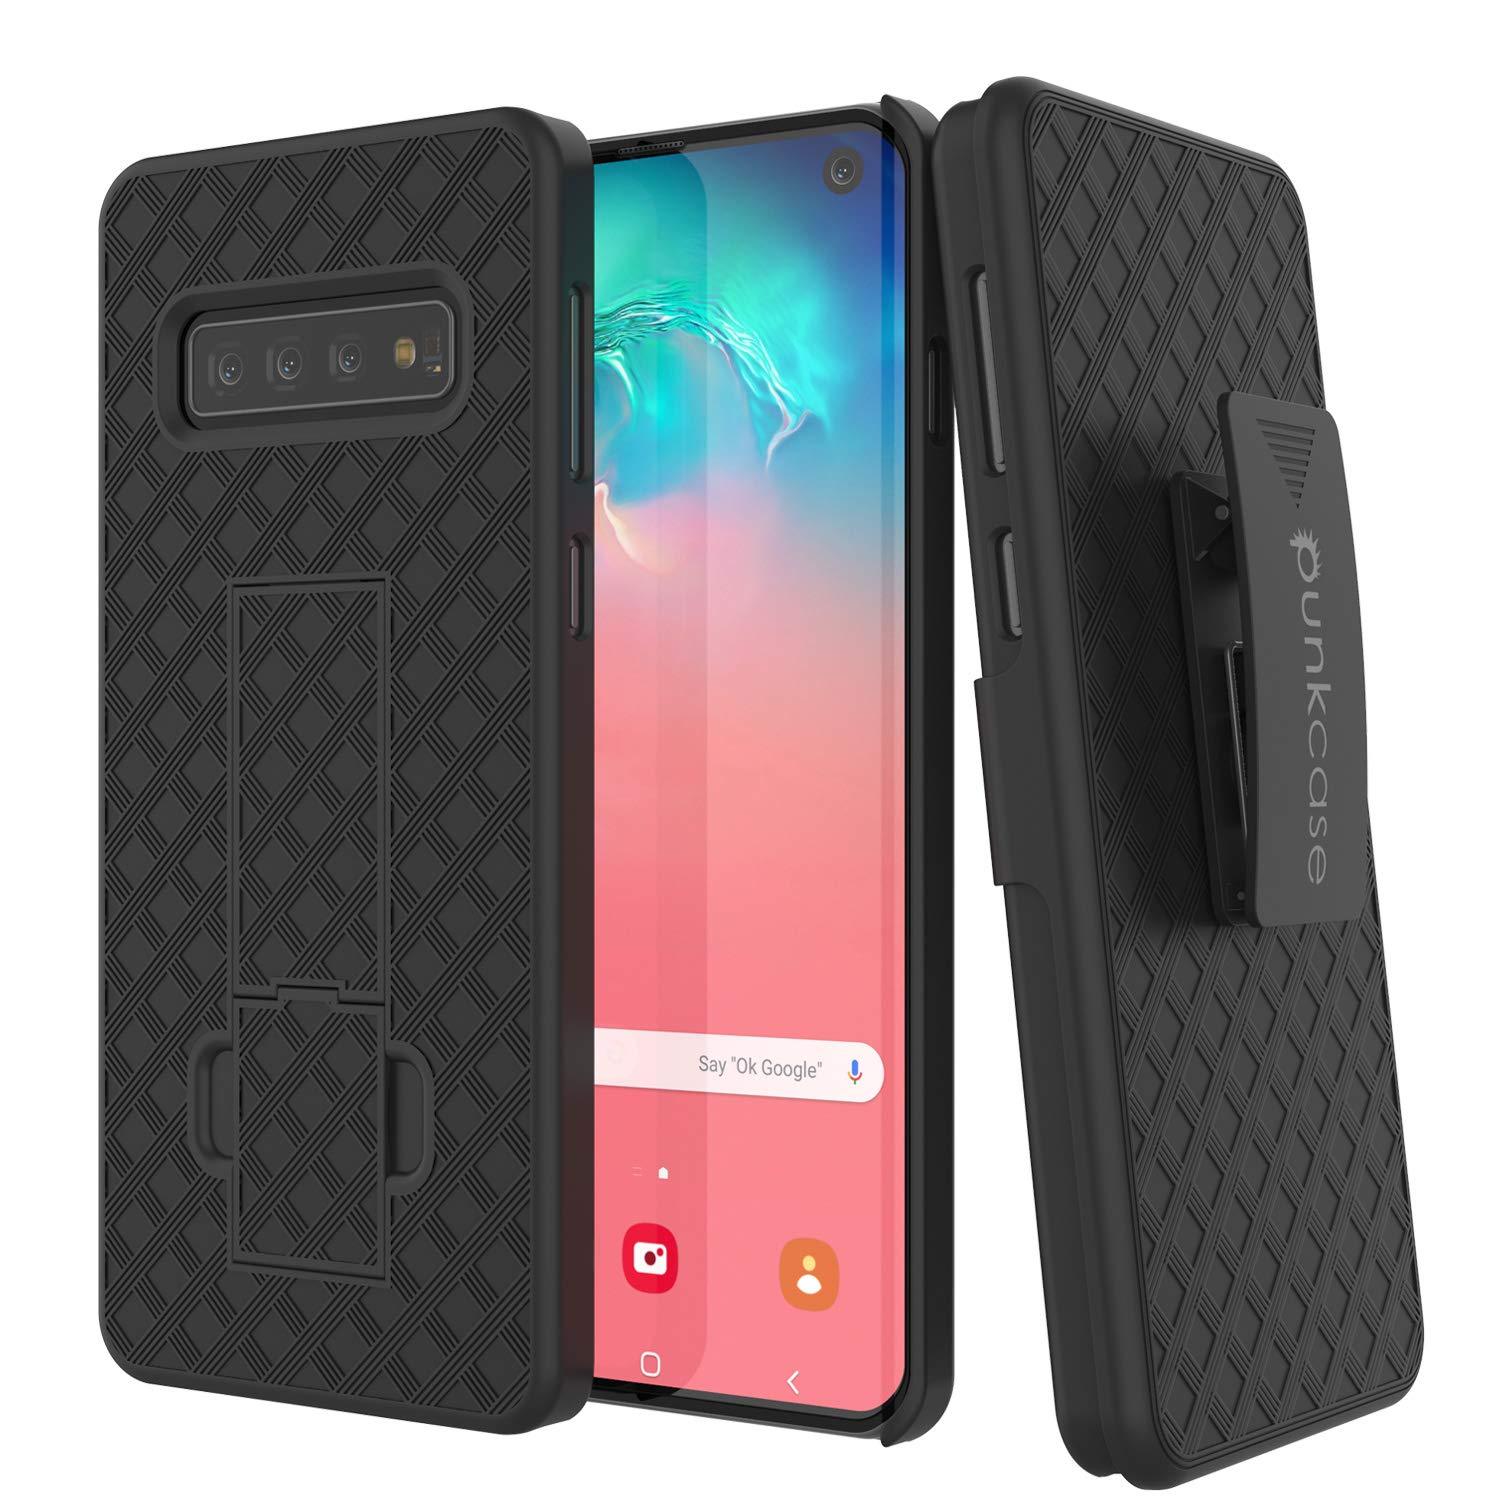 Punkcase Galaxy S10 5G Case With Screen Protector, Holster Belt Clip [Black]